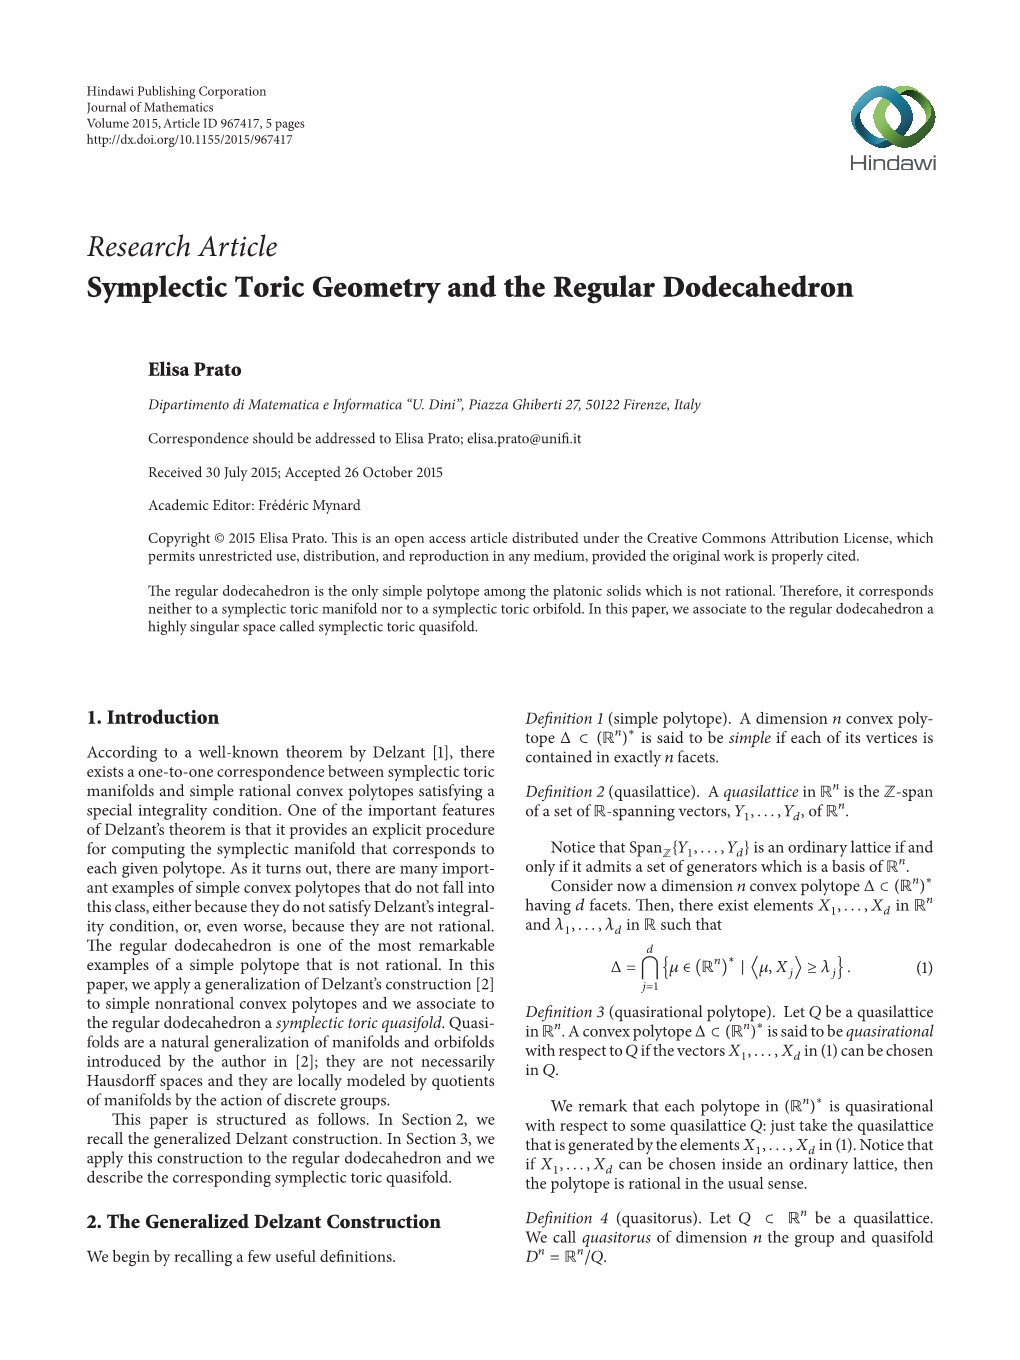 Research Article Symplectic Toric Geometry and the Regular Dodecahedron